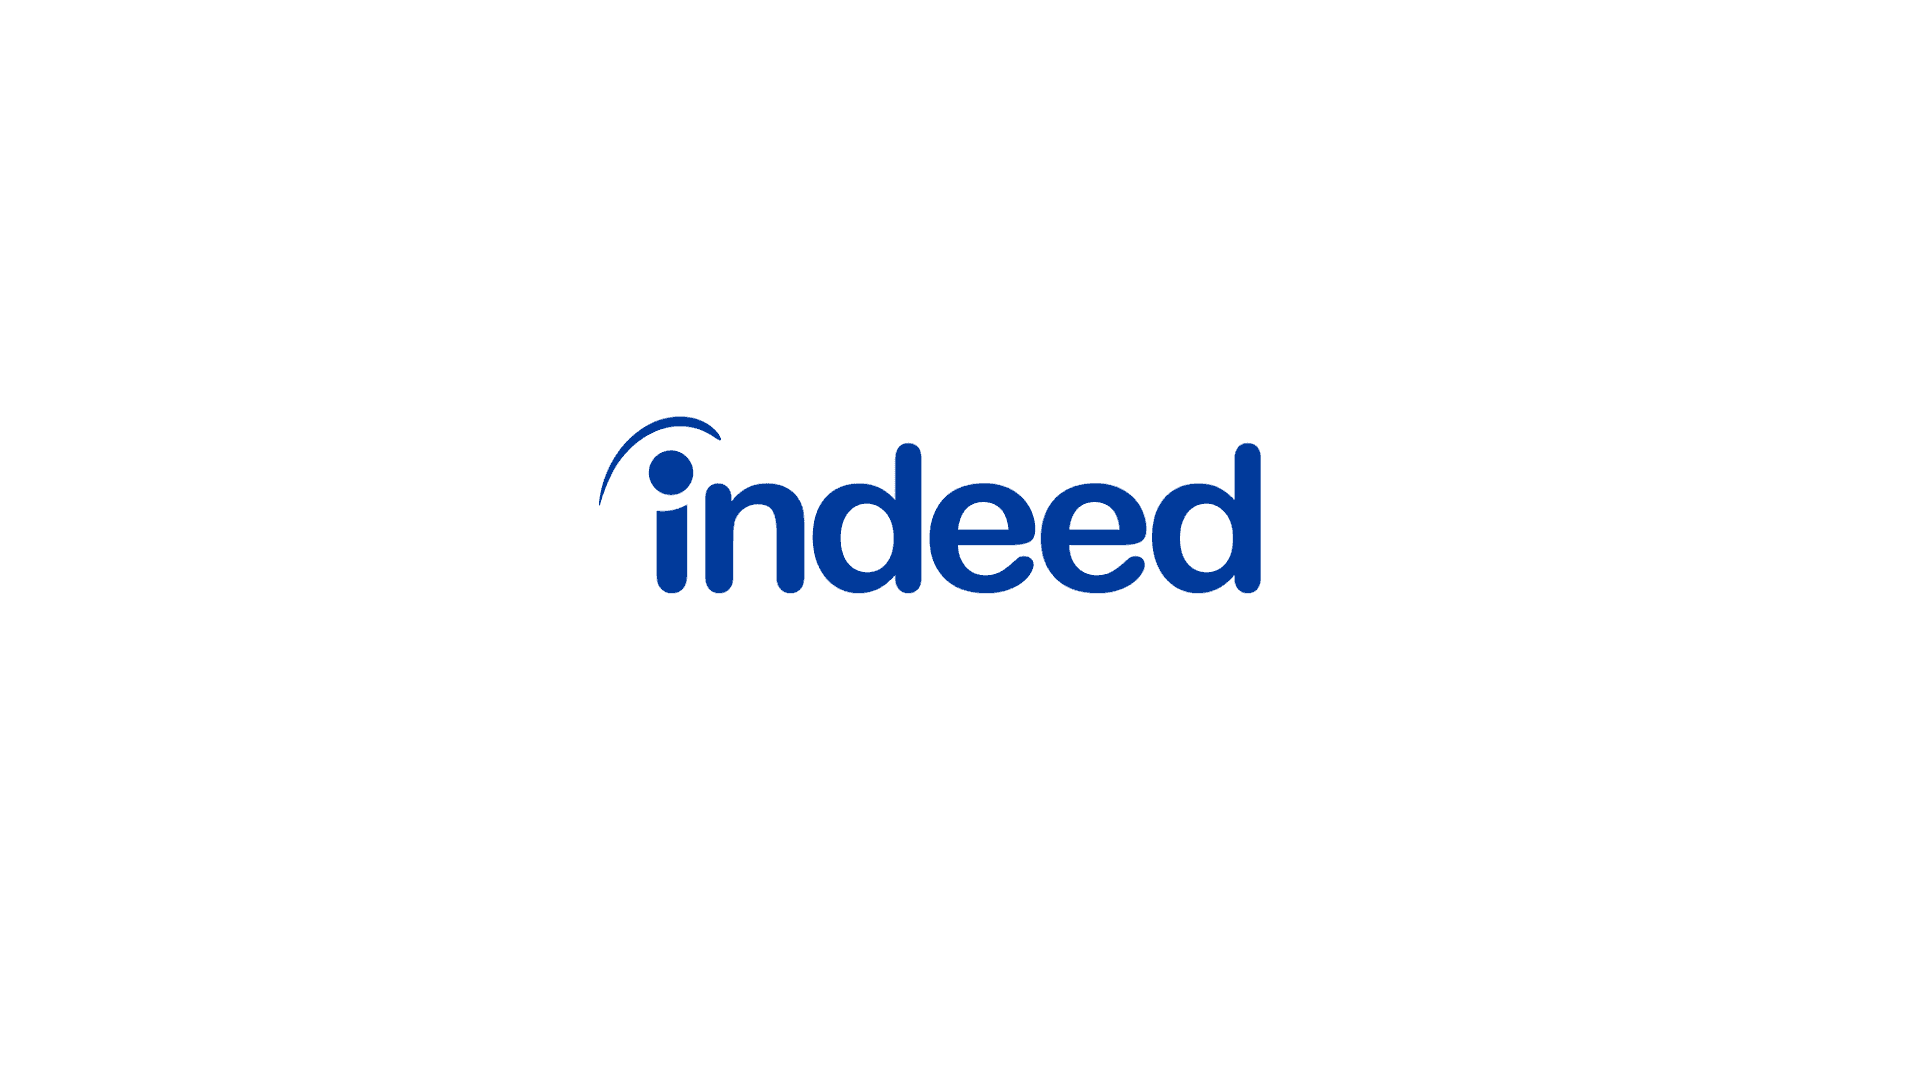 Primary Indeed logo is the word "Indeed" in Indeed Blue (#003A9B). The "i" is lowercase and has an an arc over it.